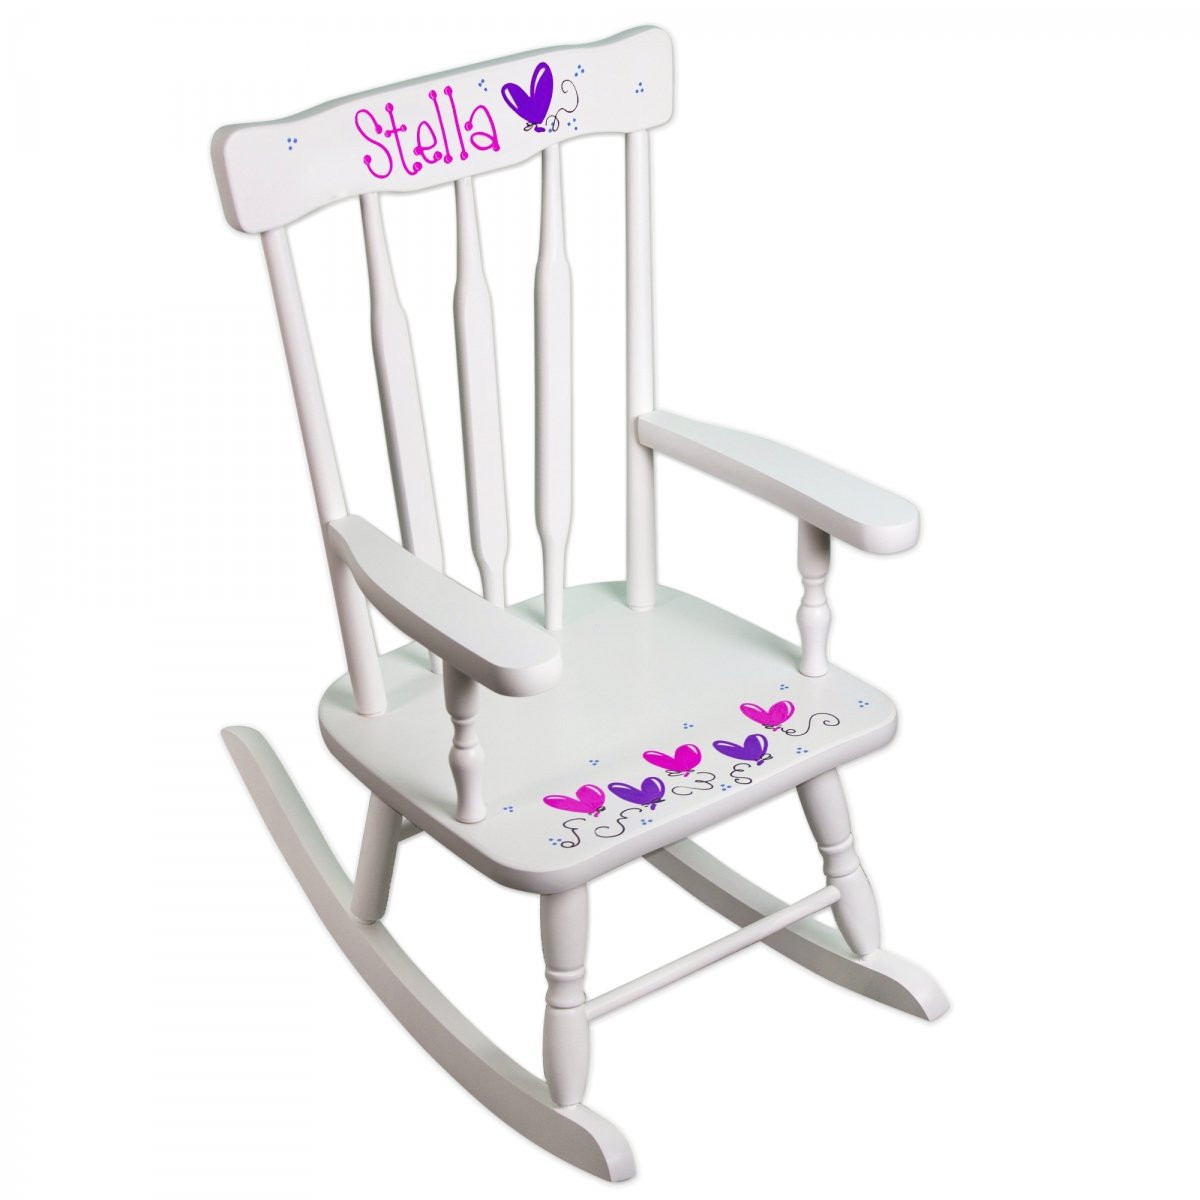 Personalized Kids Rocking Chair
 Toddler Rocking Chairs Personalized New Plastic Chair For